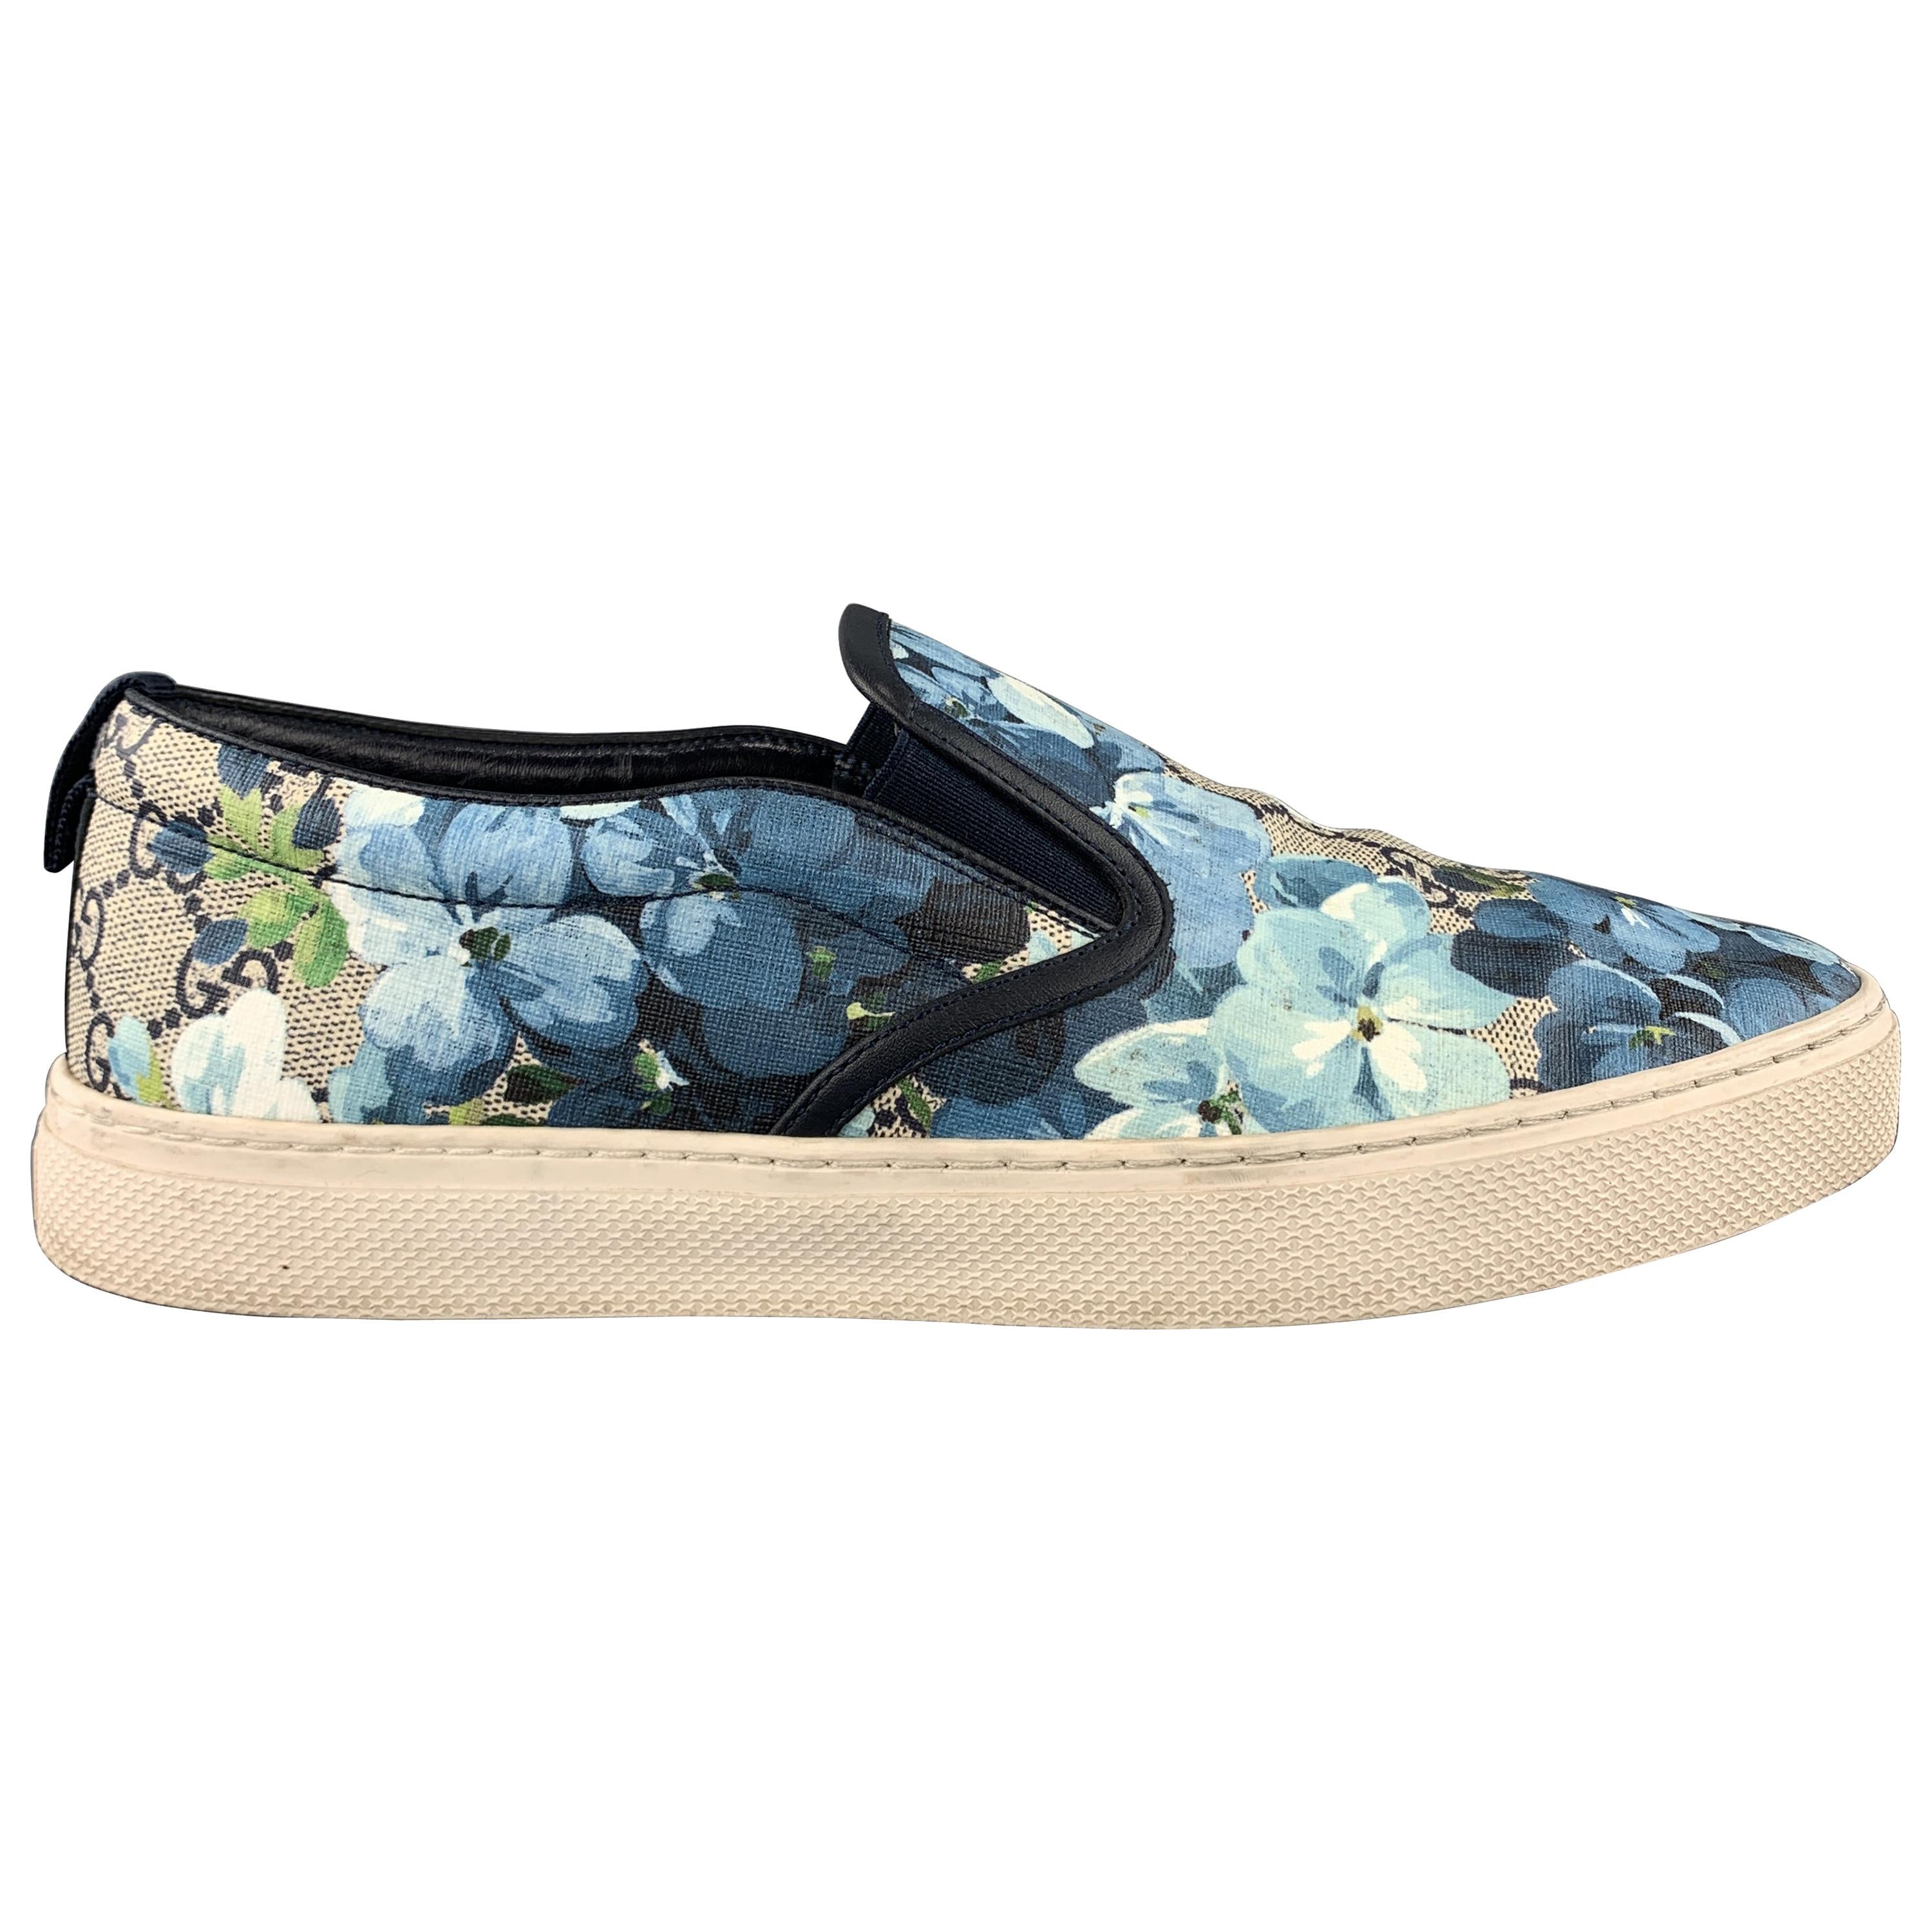 GUCCI Size 9.5 Blue Floral Blooms Monogram Canvas Slip On Sneakers